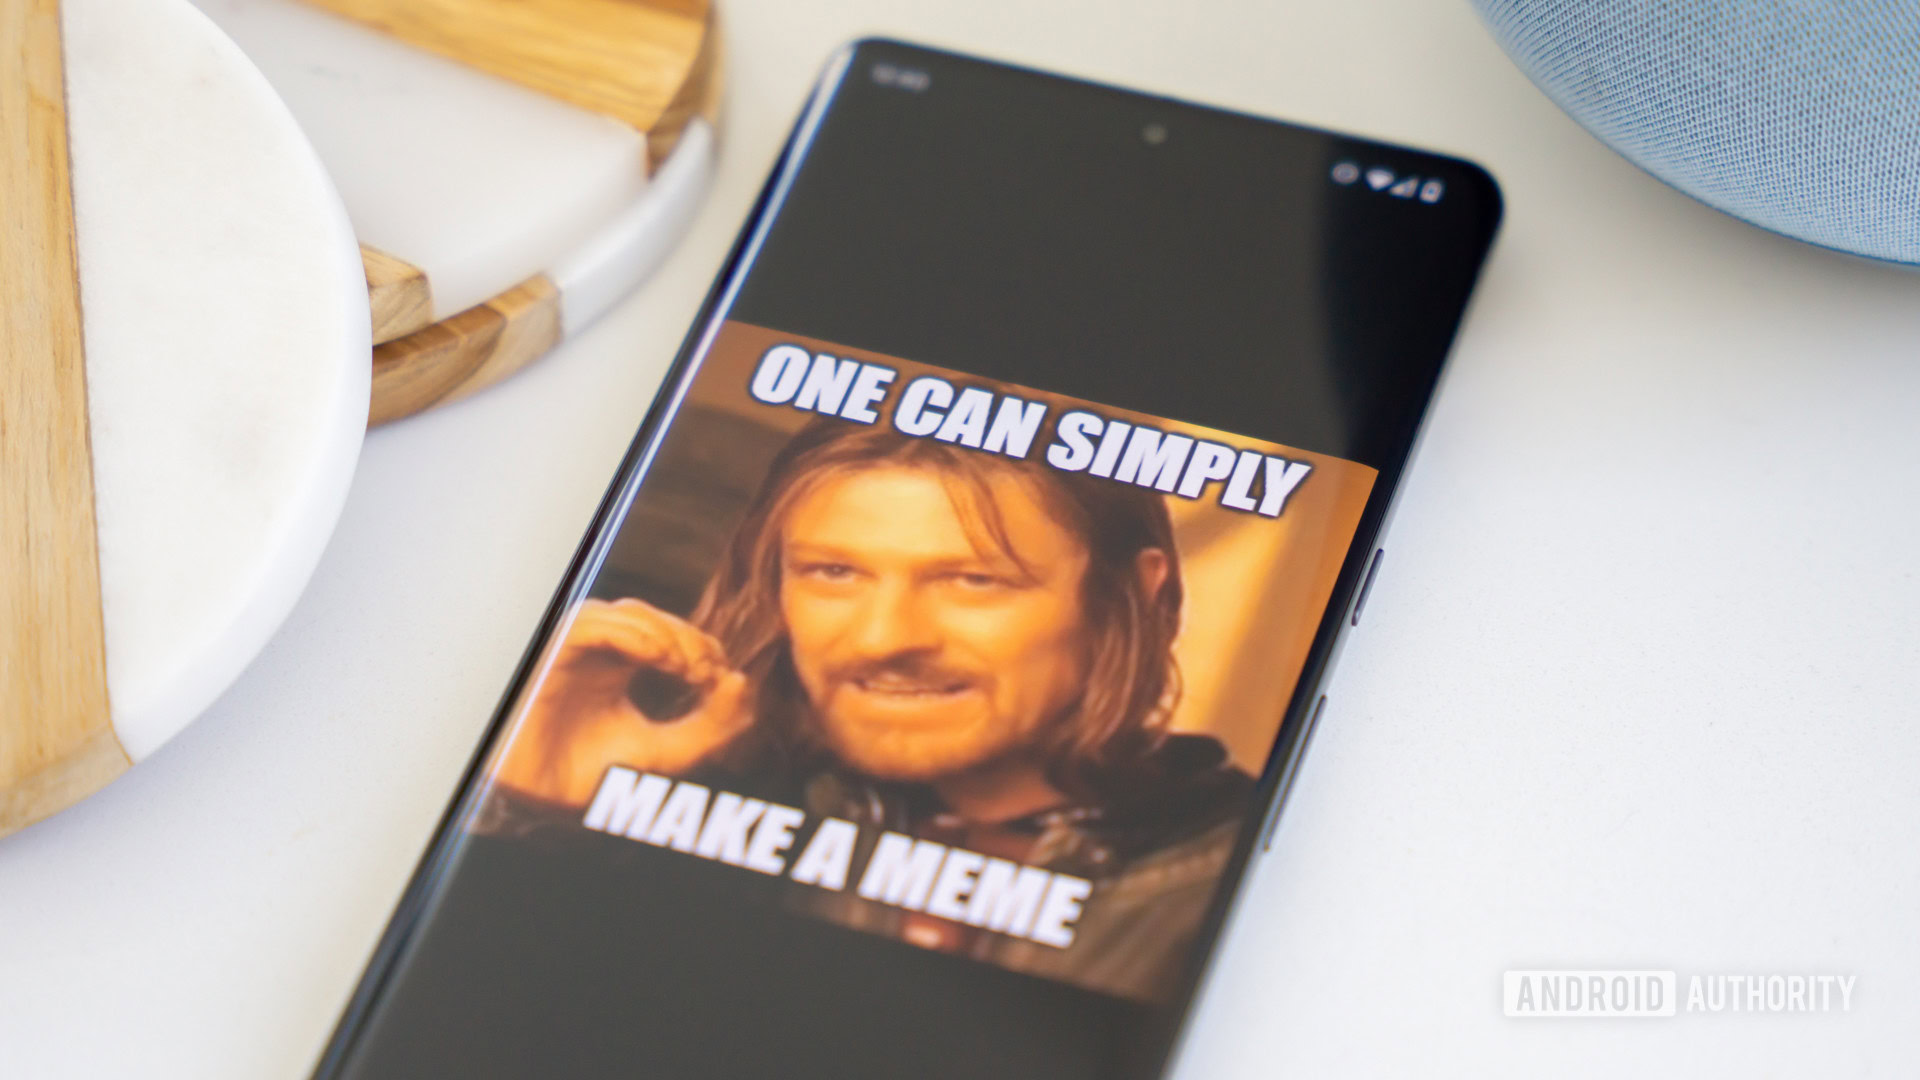 Top 10 Best Make Meme Apps for Android 